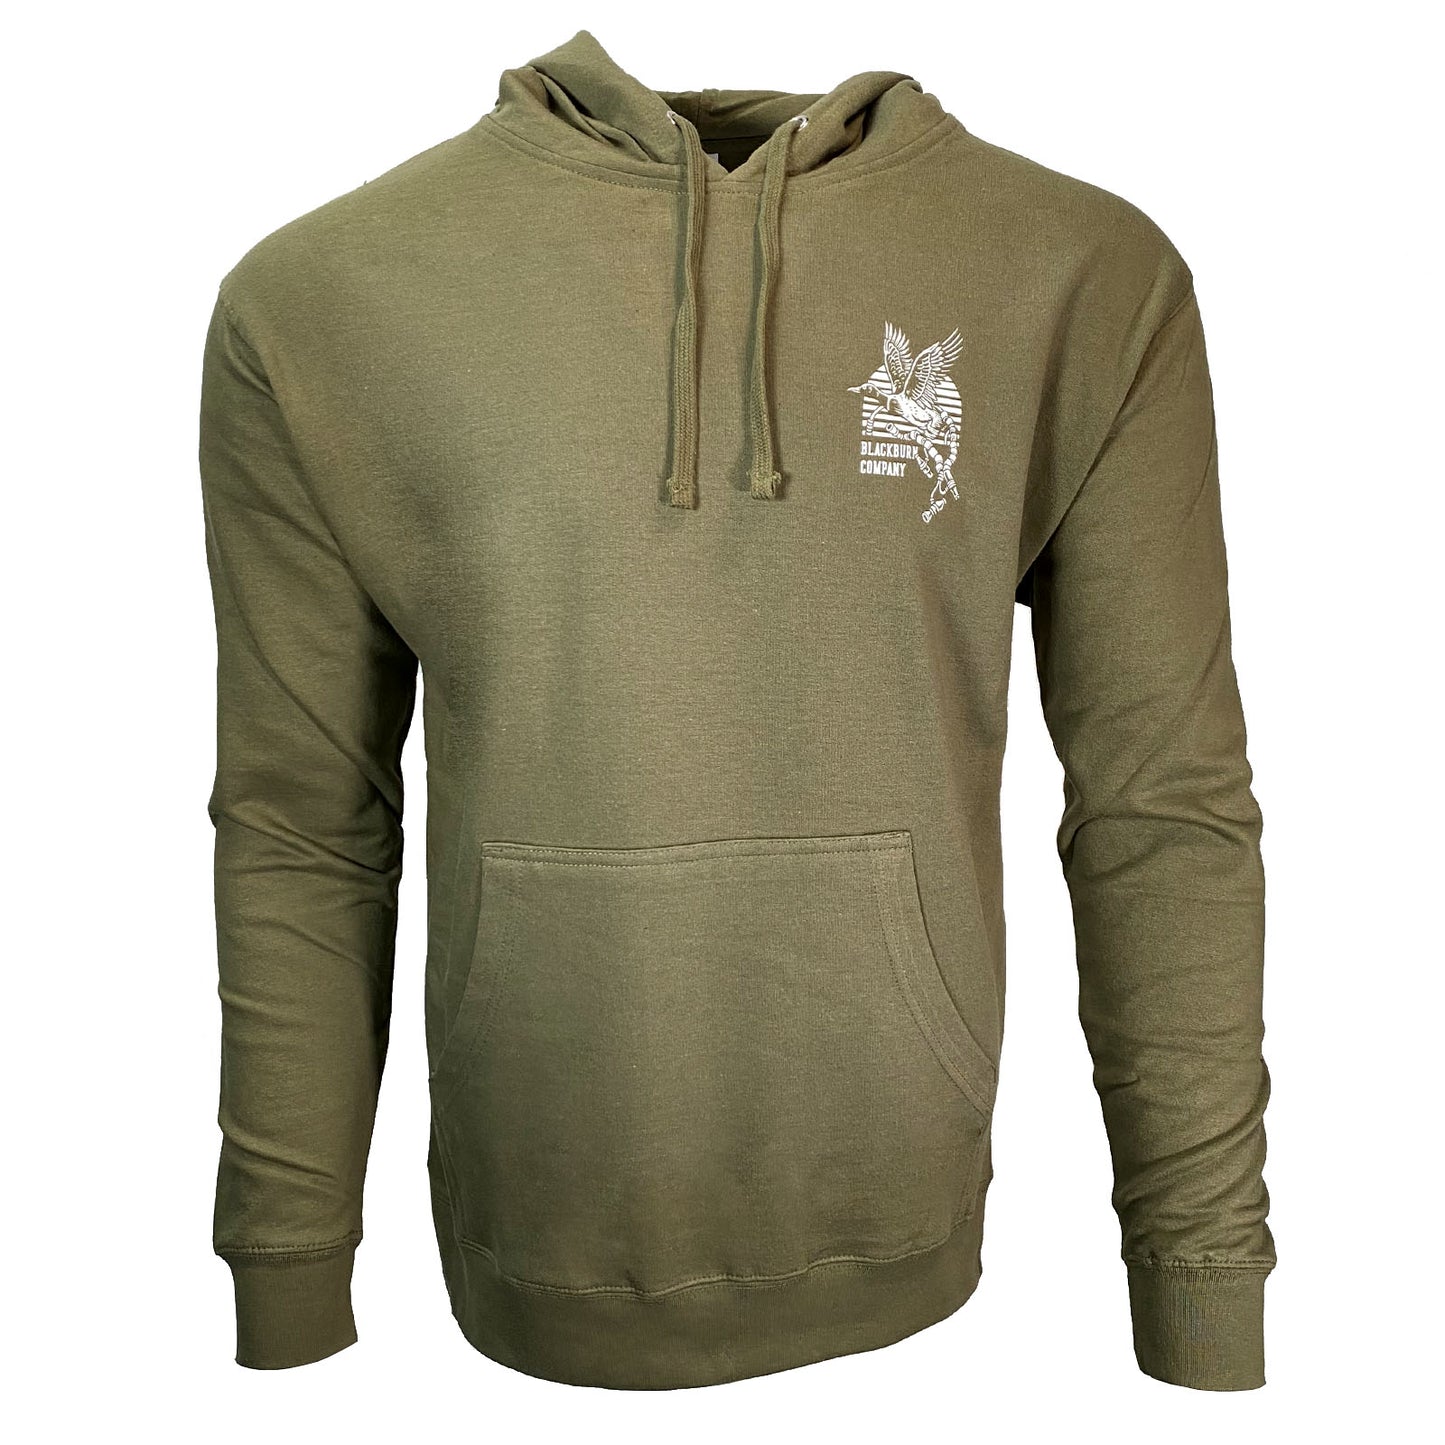 Banded Brothers Hoodie, Green